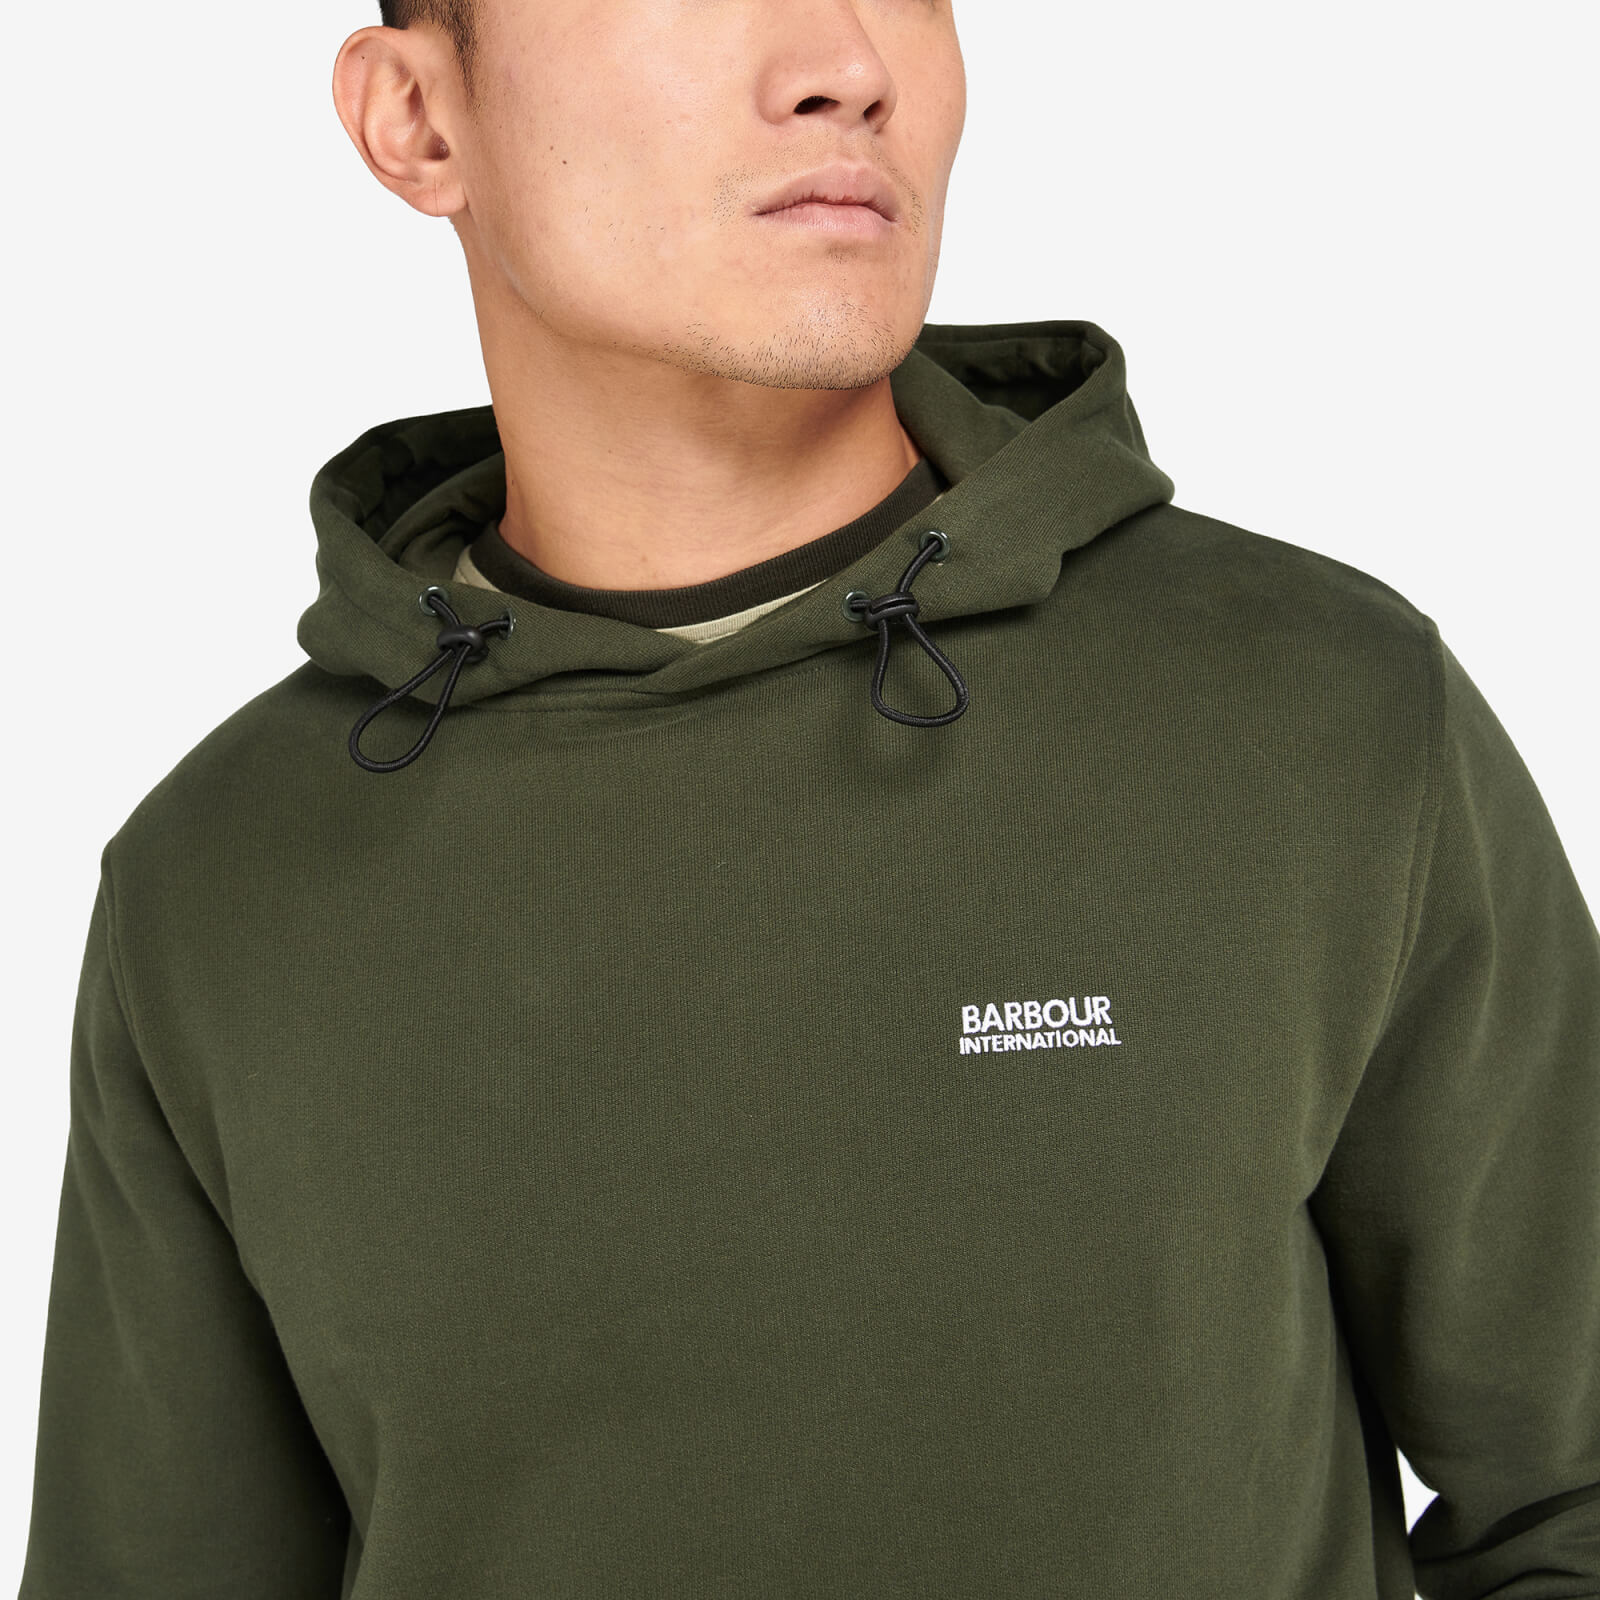 Barbour International Roadster Cotton-blend Hoodie - S Mol0510gn91 General Clothing, Green